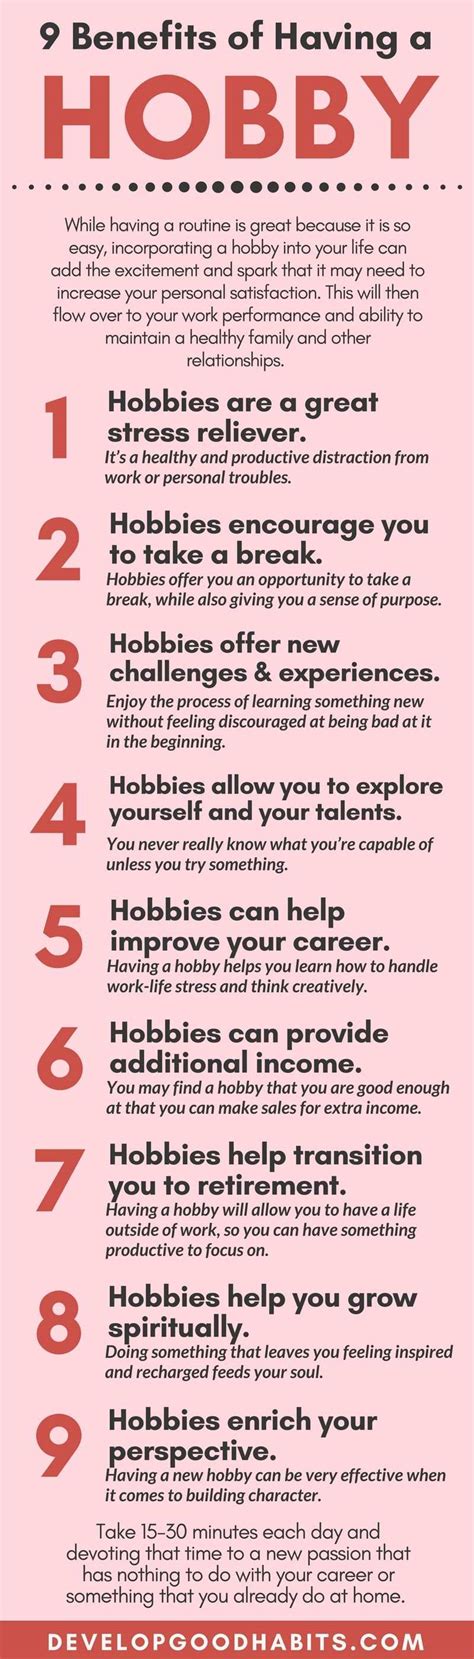 22 Benefits Of Having A Hobby Or Enjoying A Leisure Activity